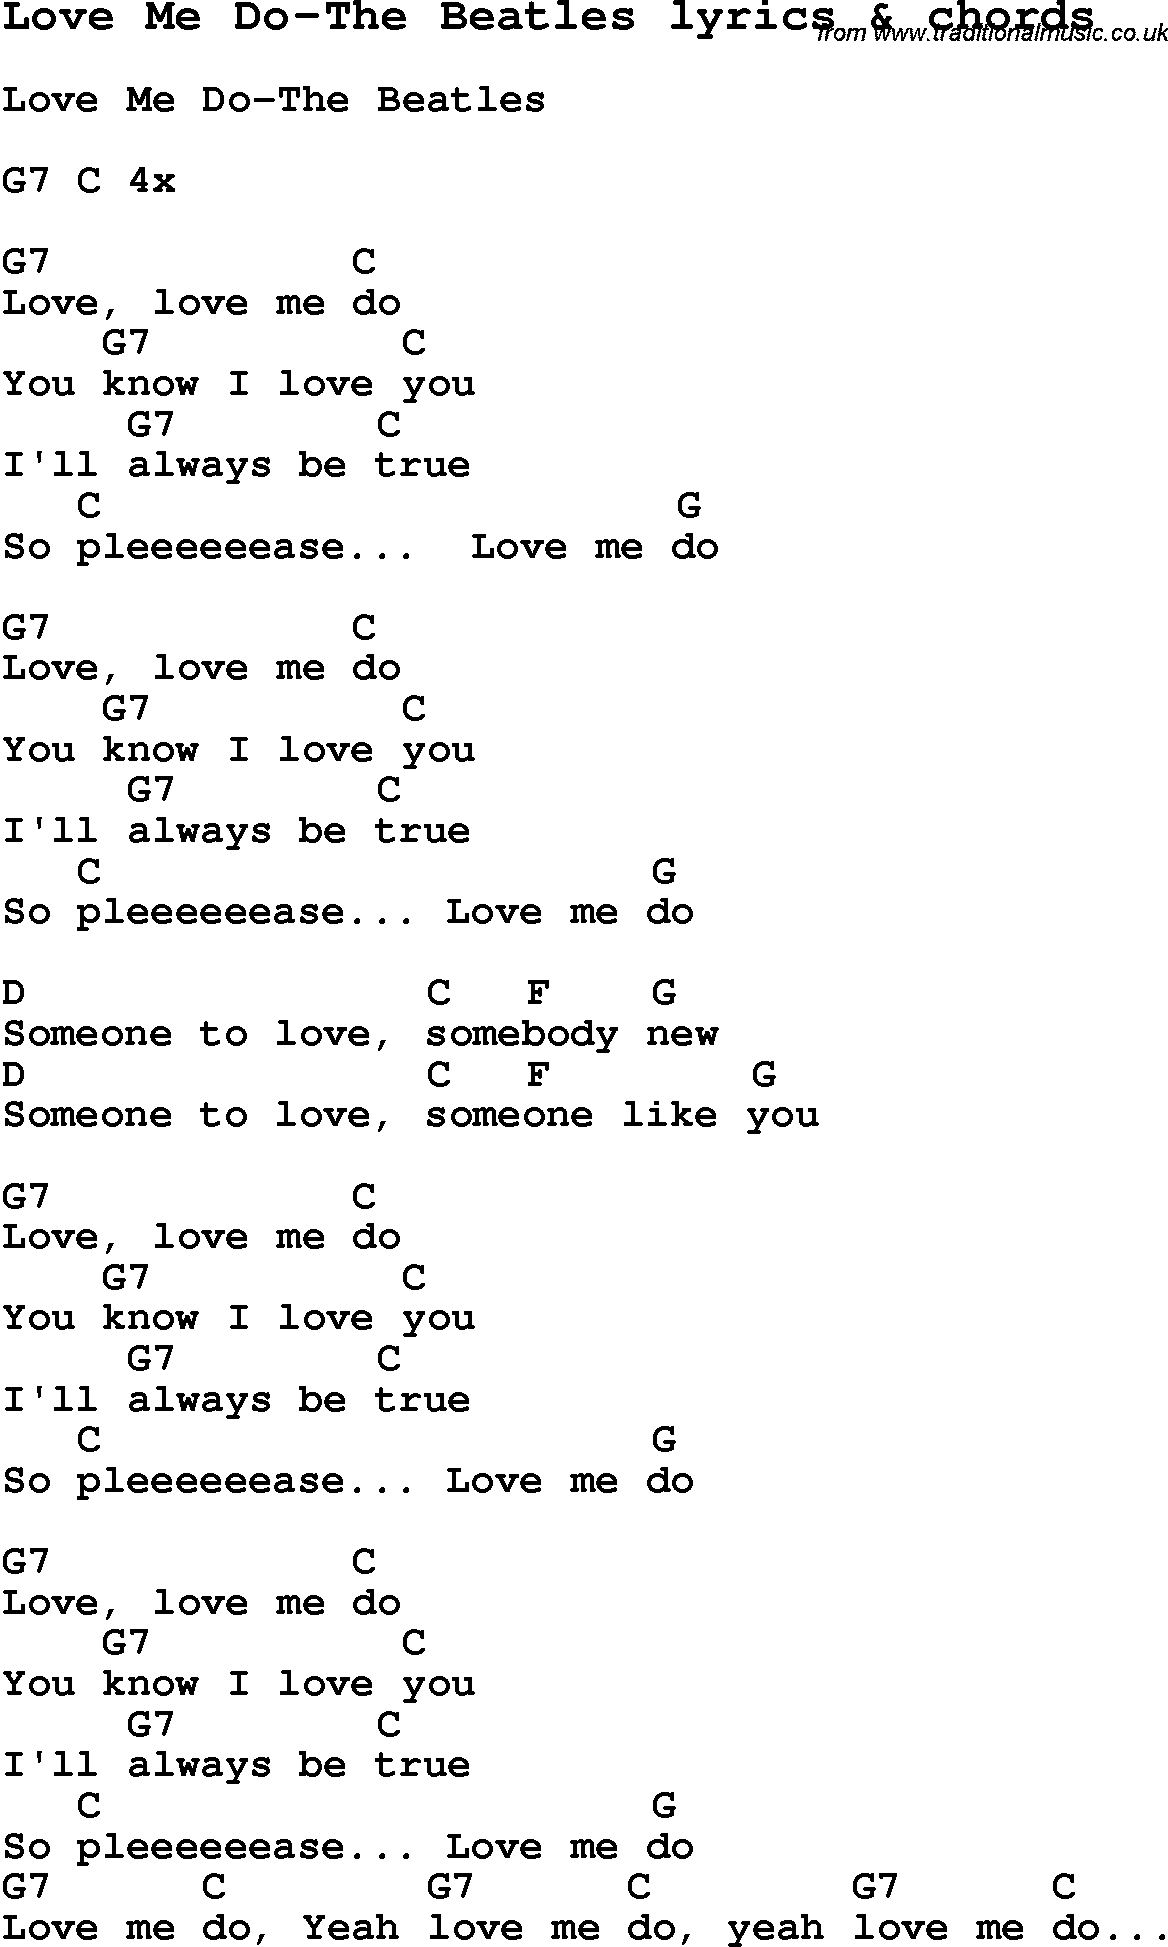 Love Song Lyrics For Love Me Do The Beatles With Chords